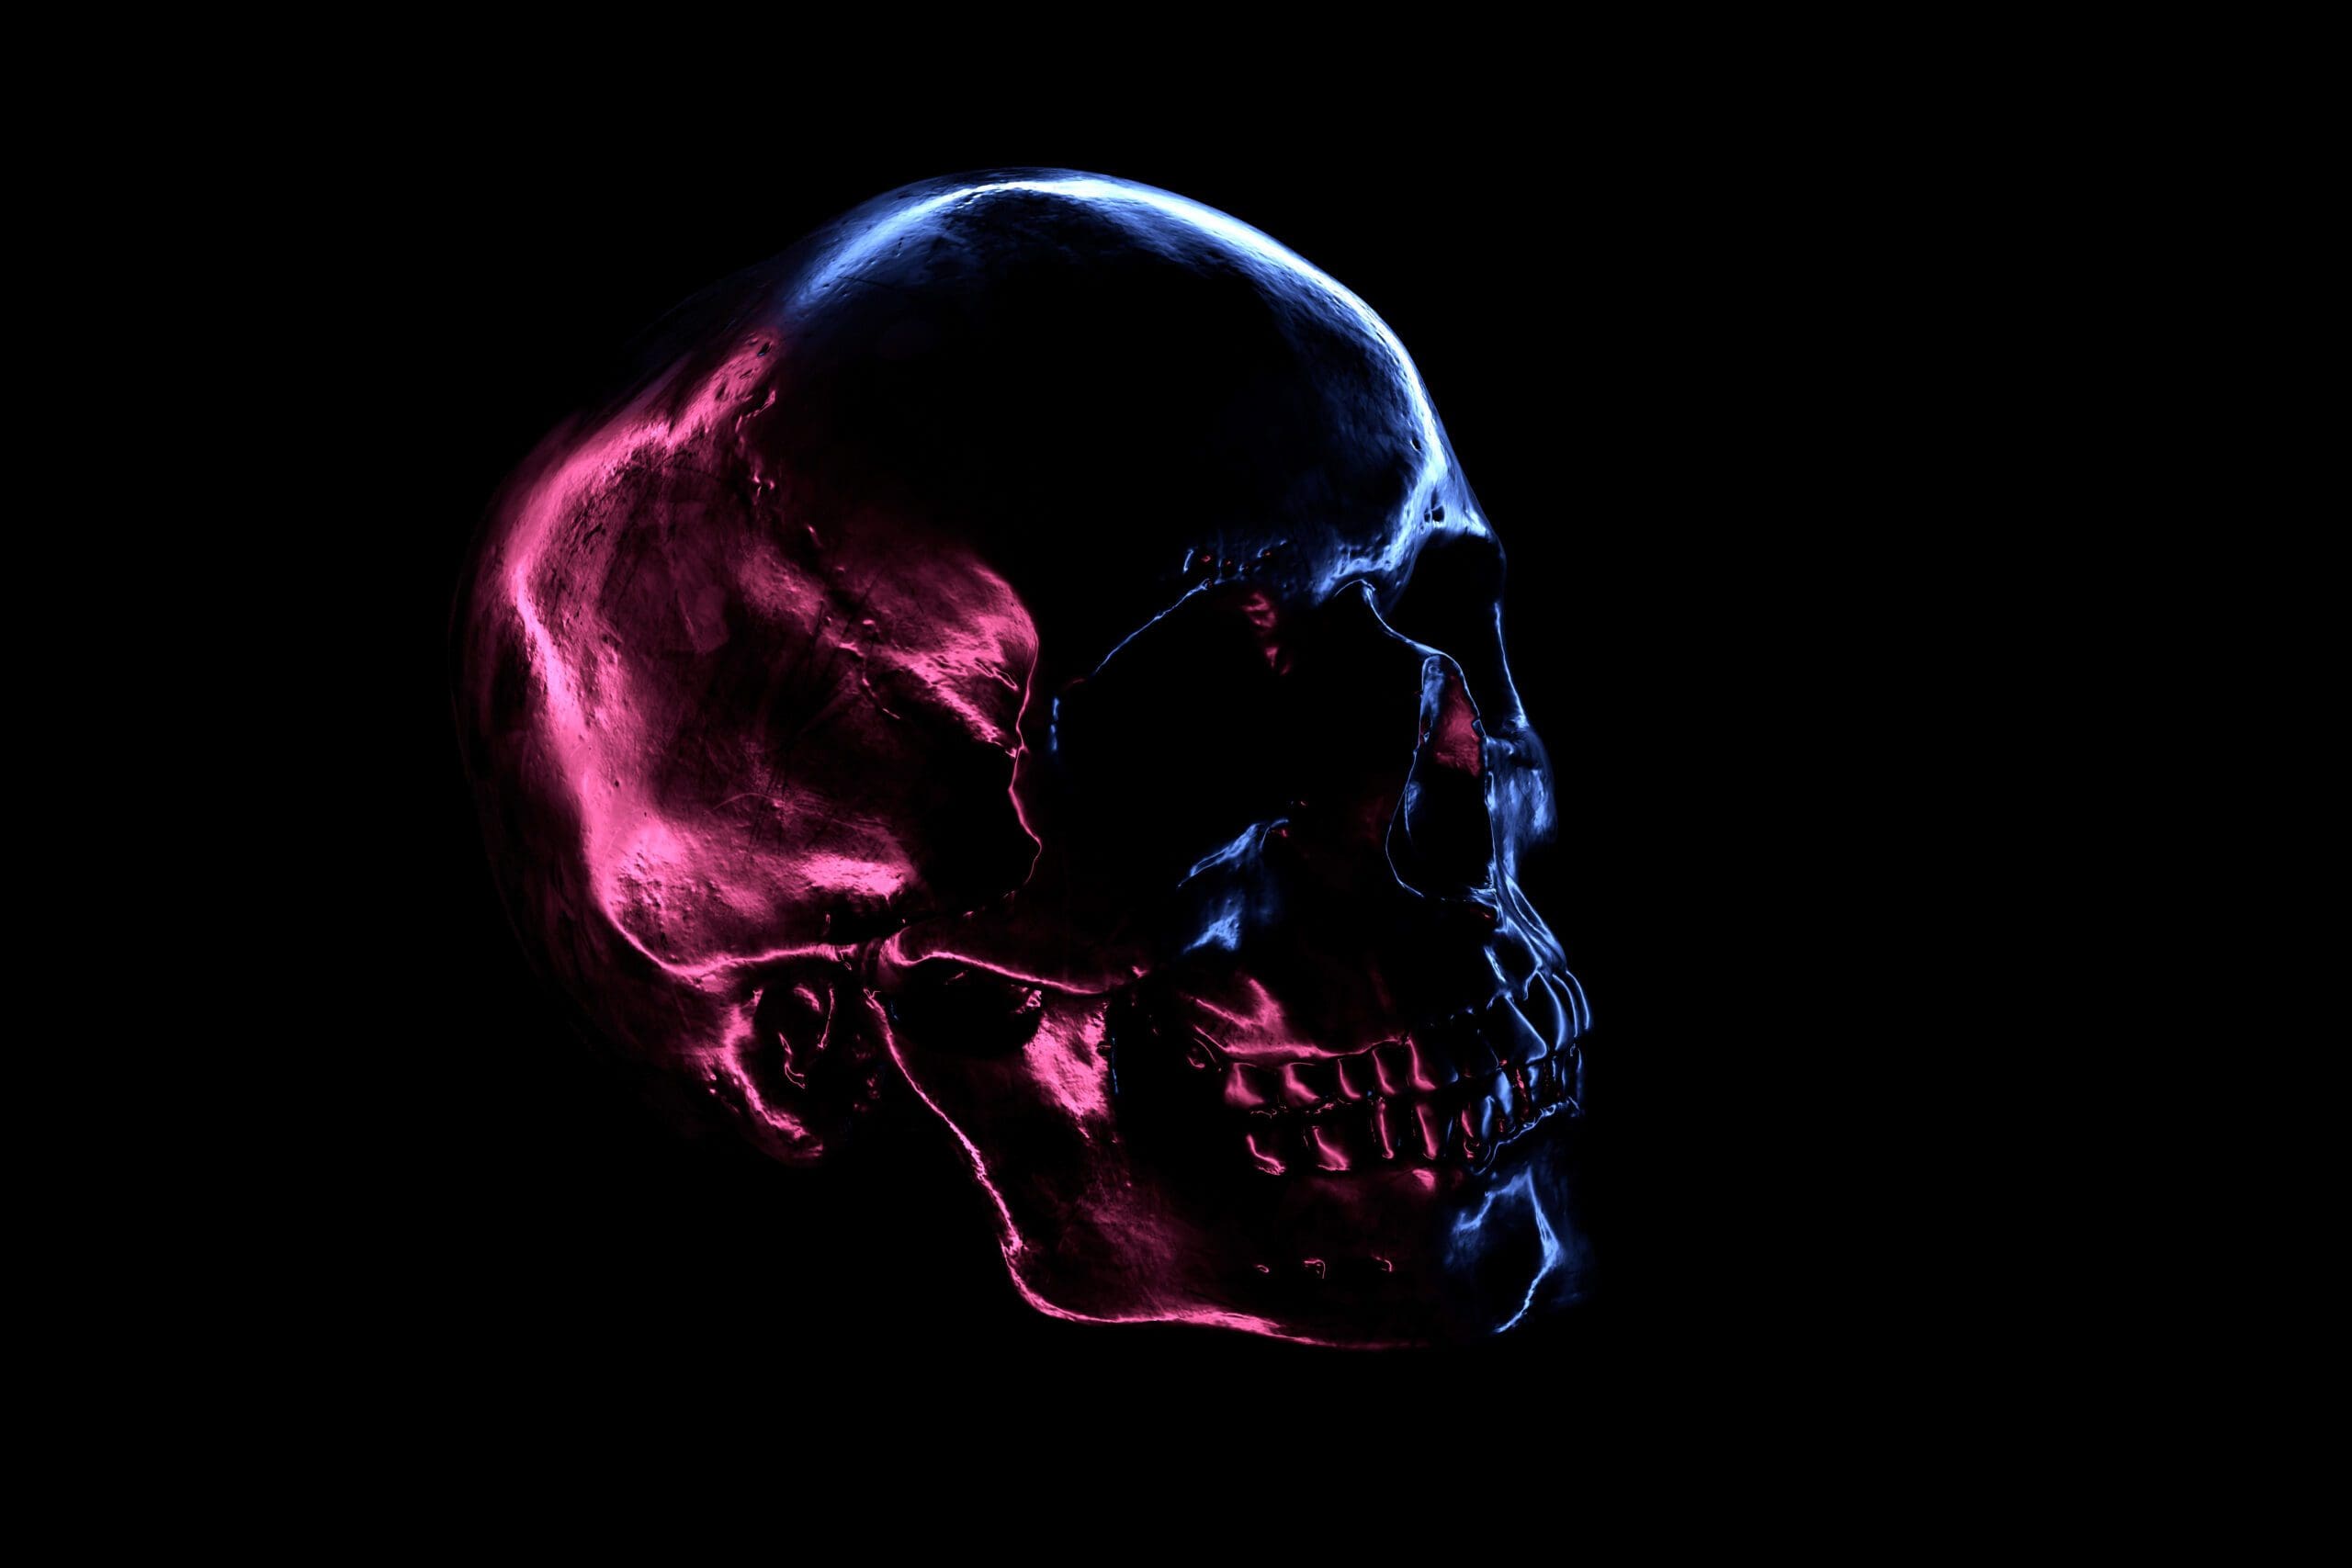 A metallic skull with neon reflection symbolizing the intersection of necropolitics and ai